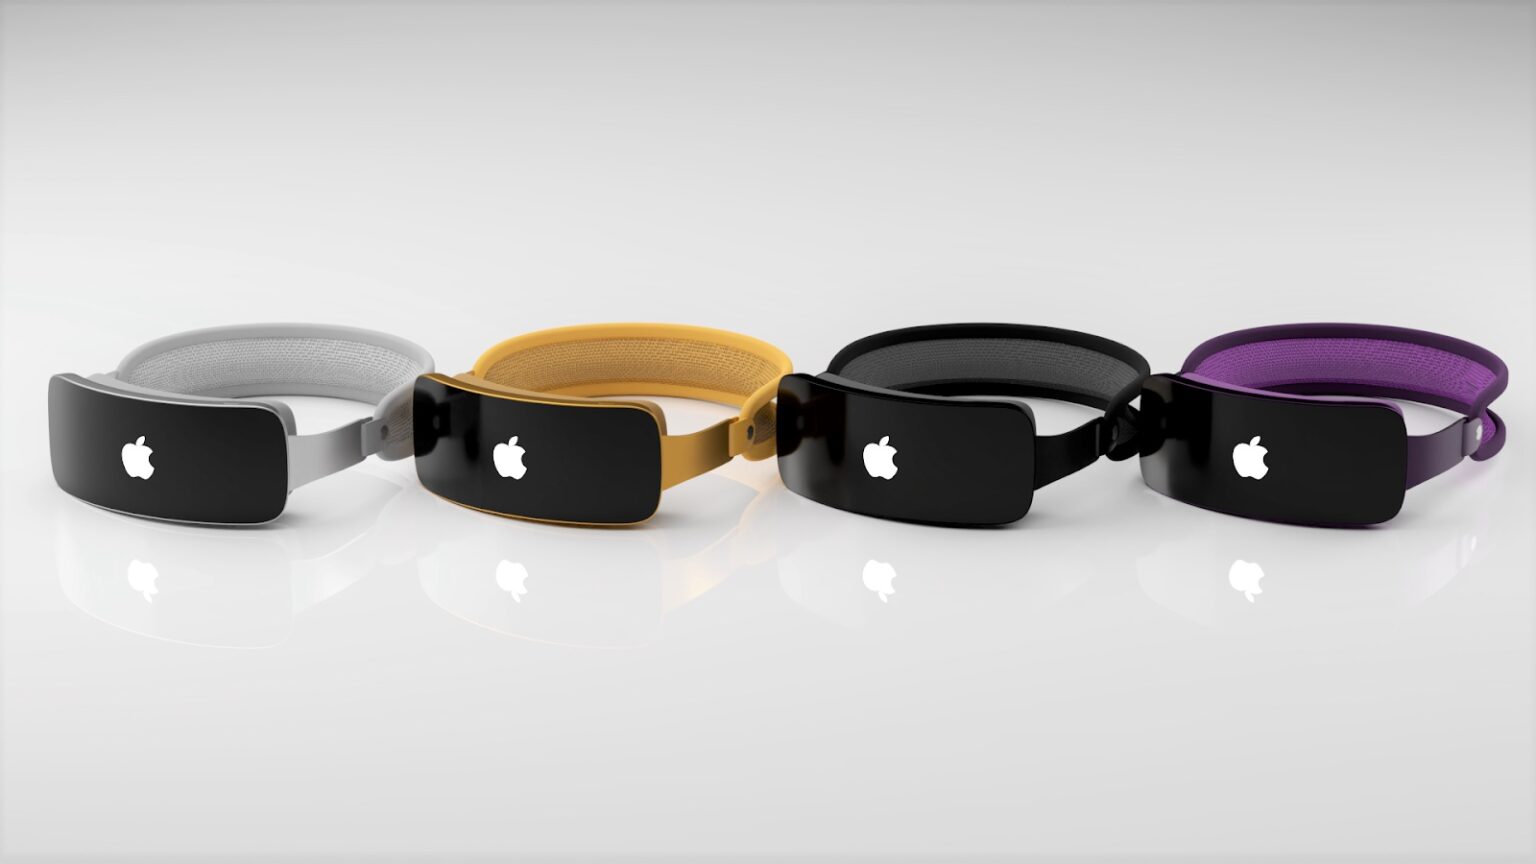 Apple VR/AR headset concept by Ahmed Chenni.